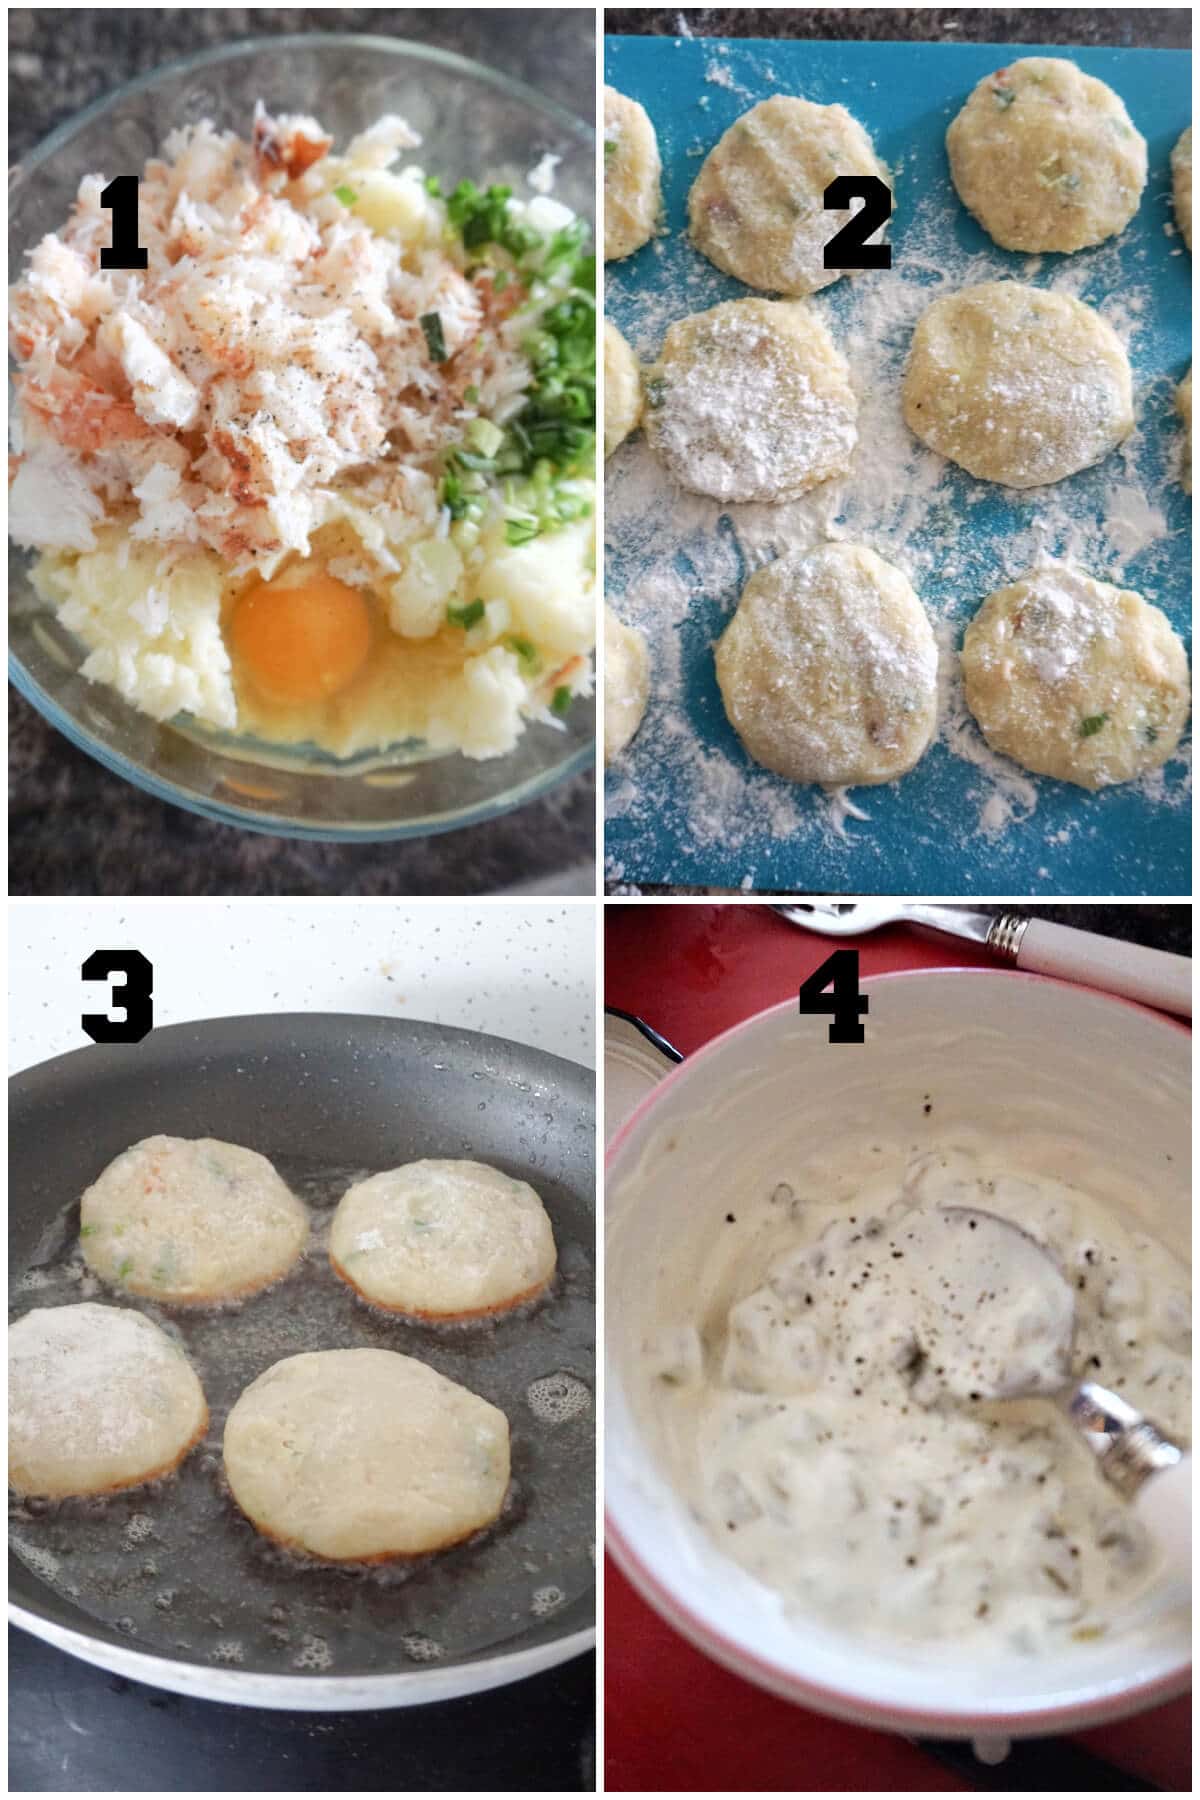 Collage of 4 pictures to show how to make crab cakes with tartar sauce.